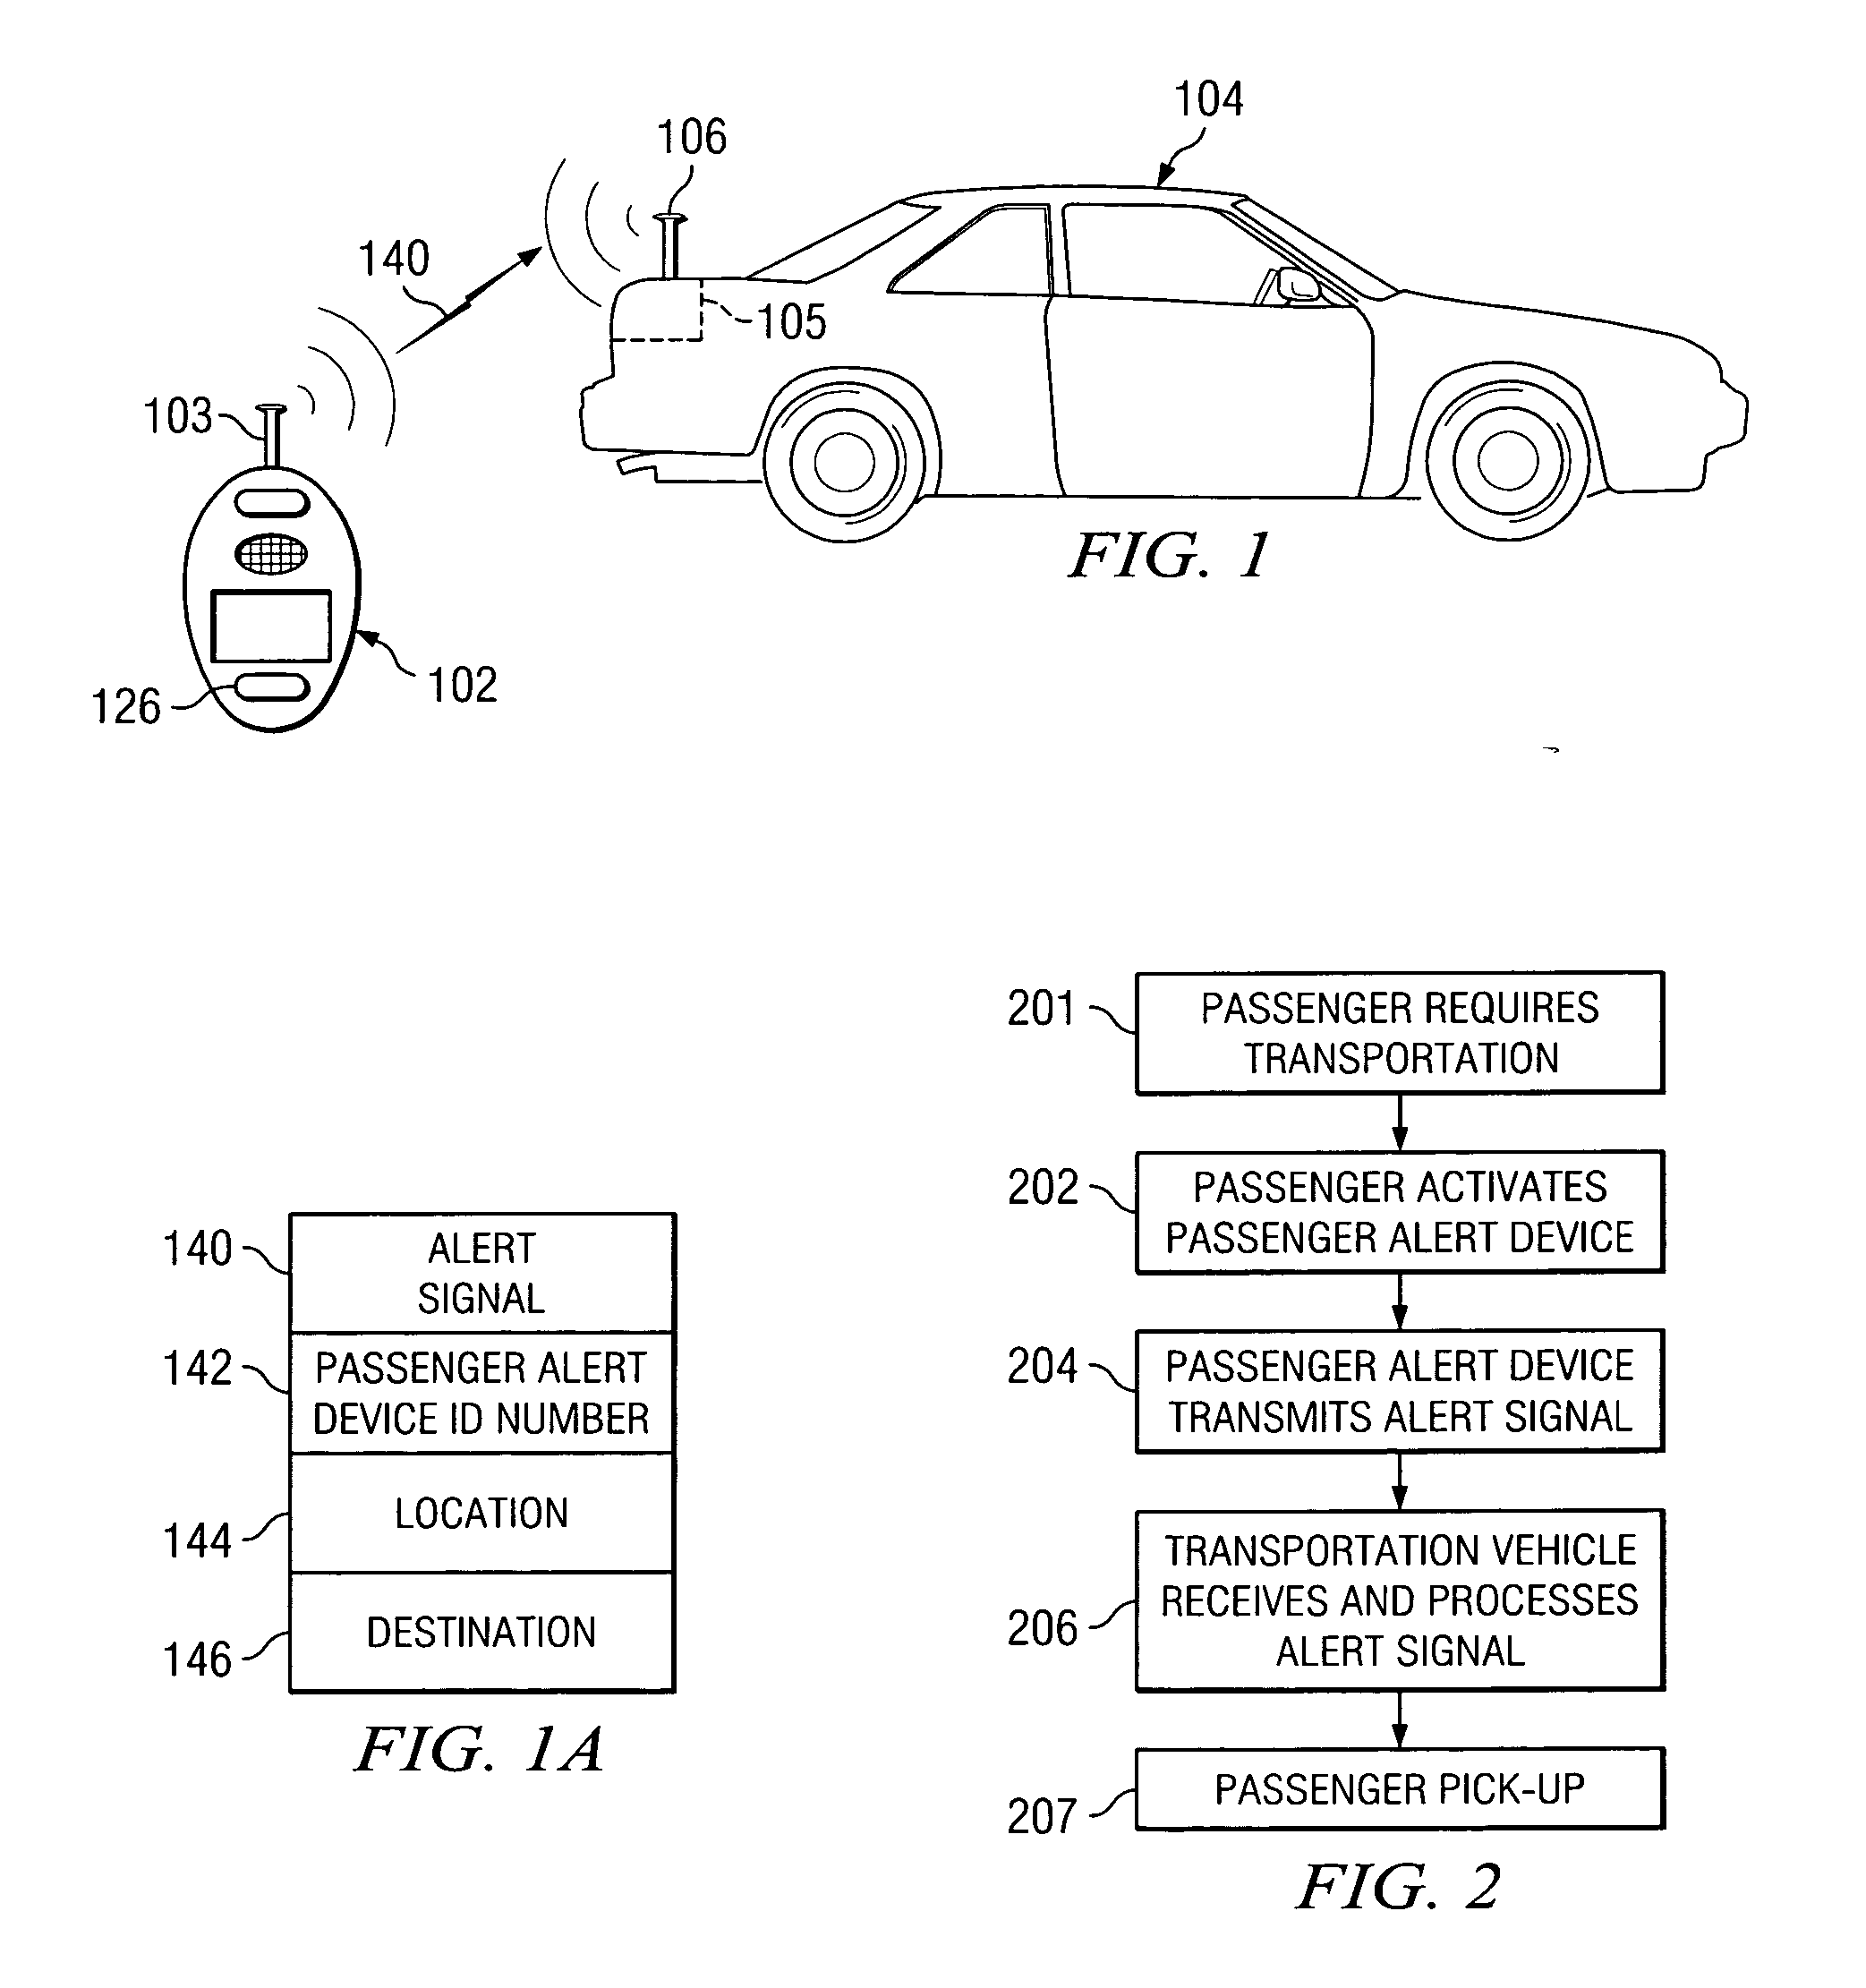 Portable service identification, notification and location device and method